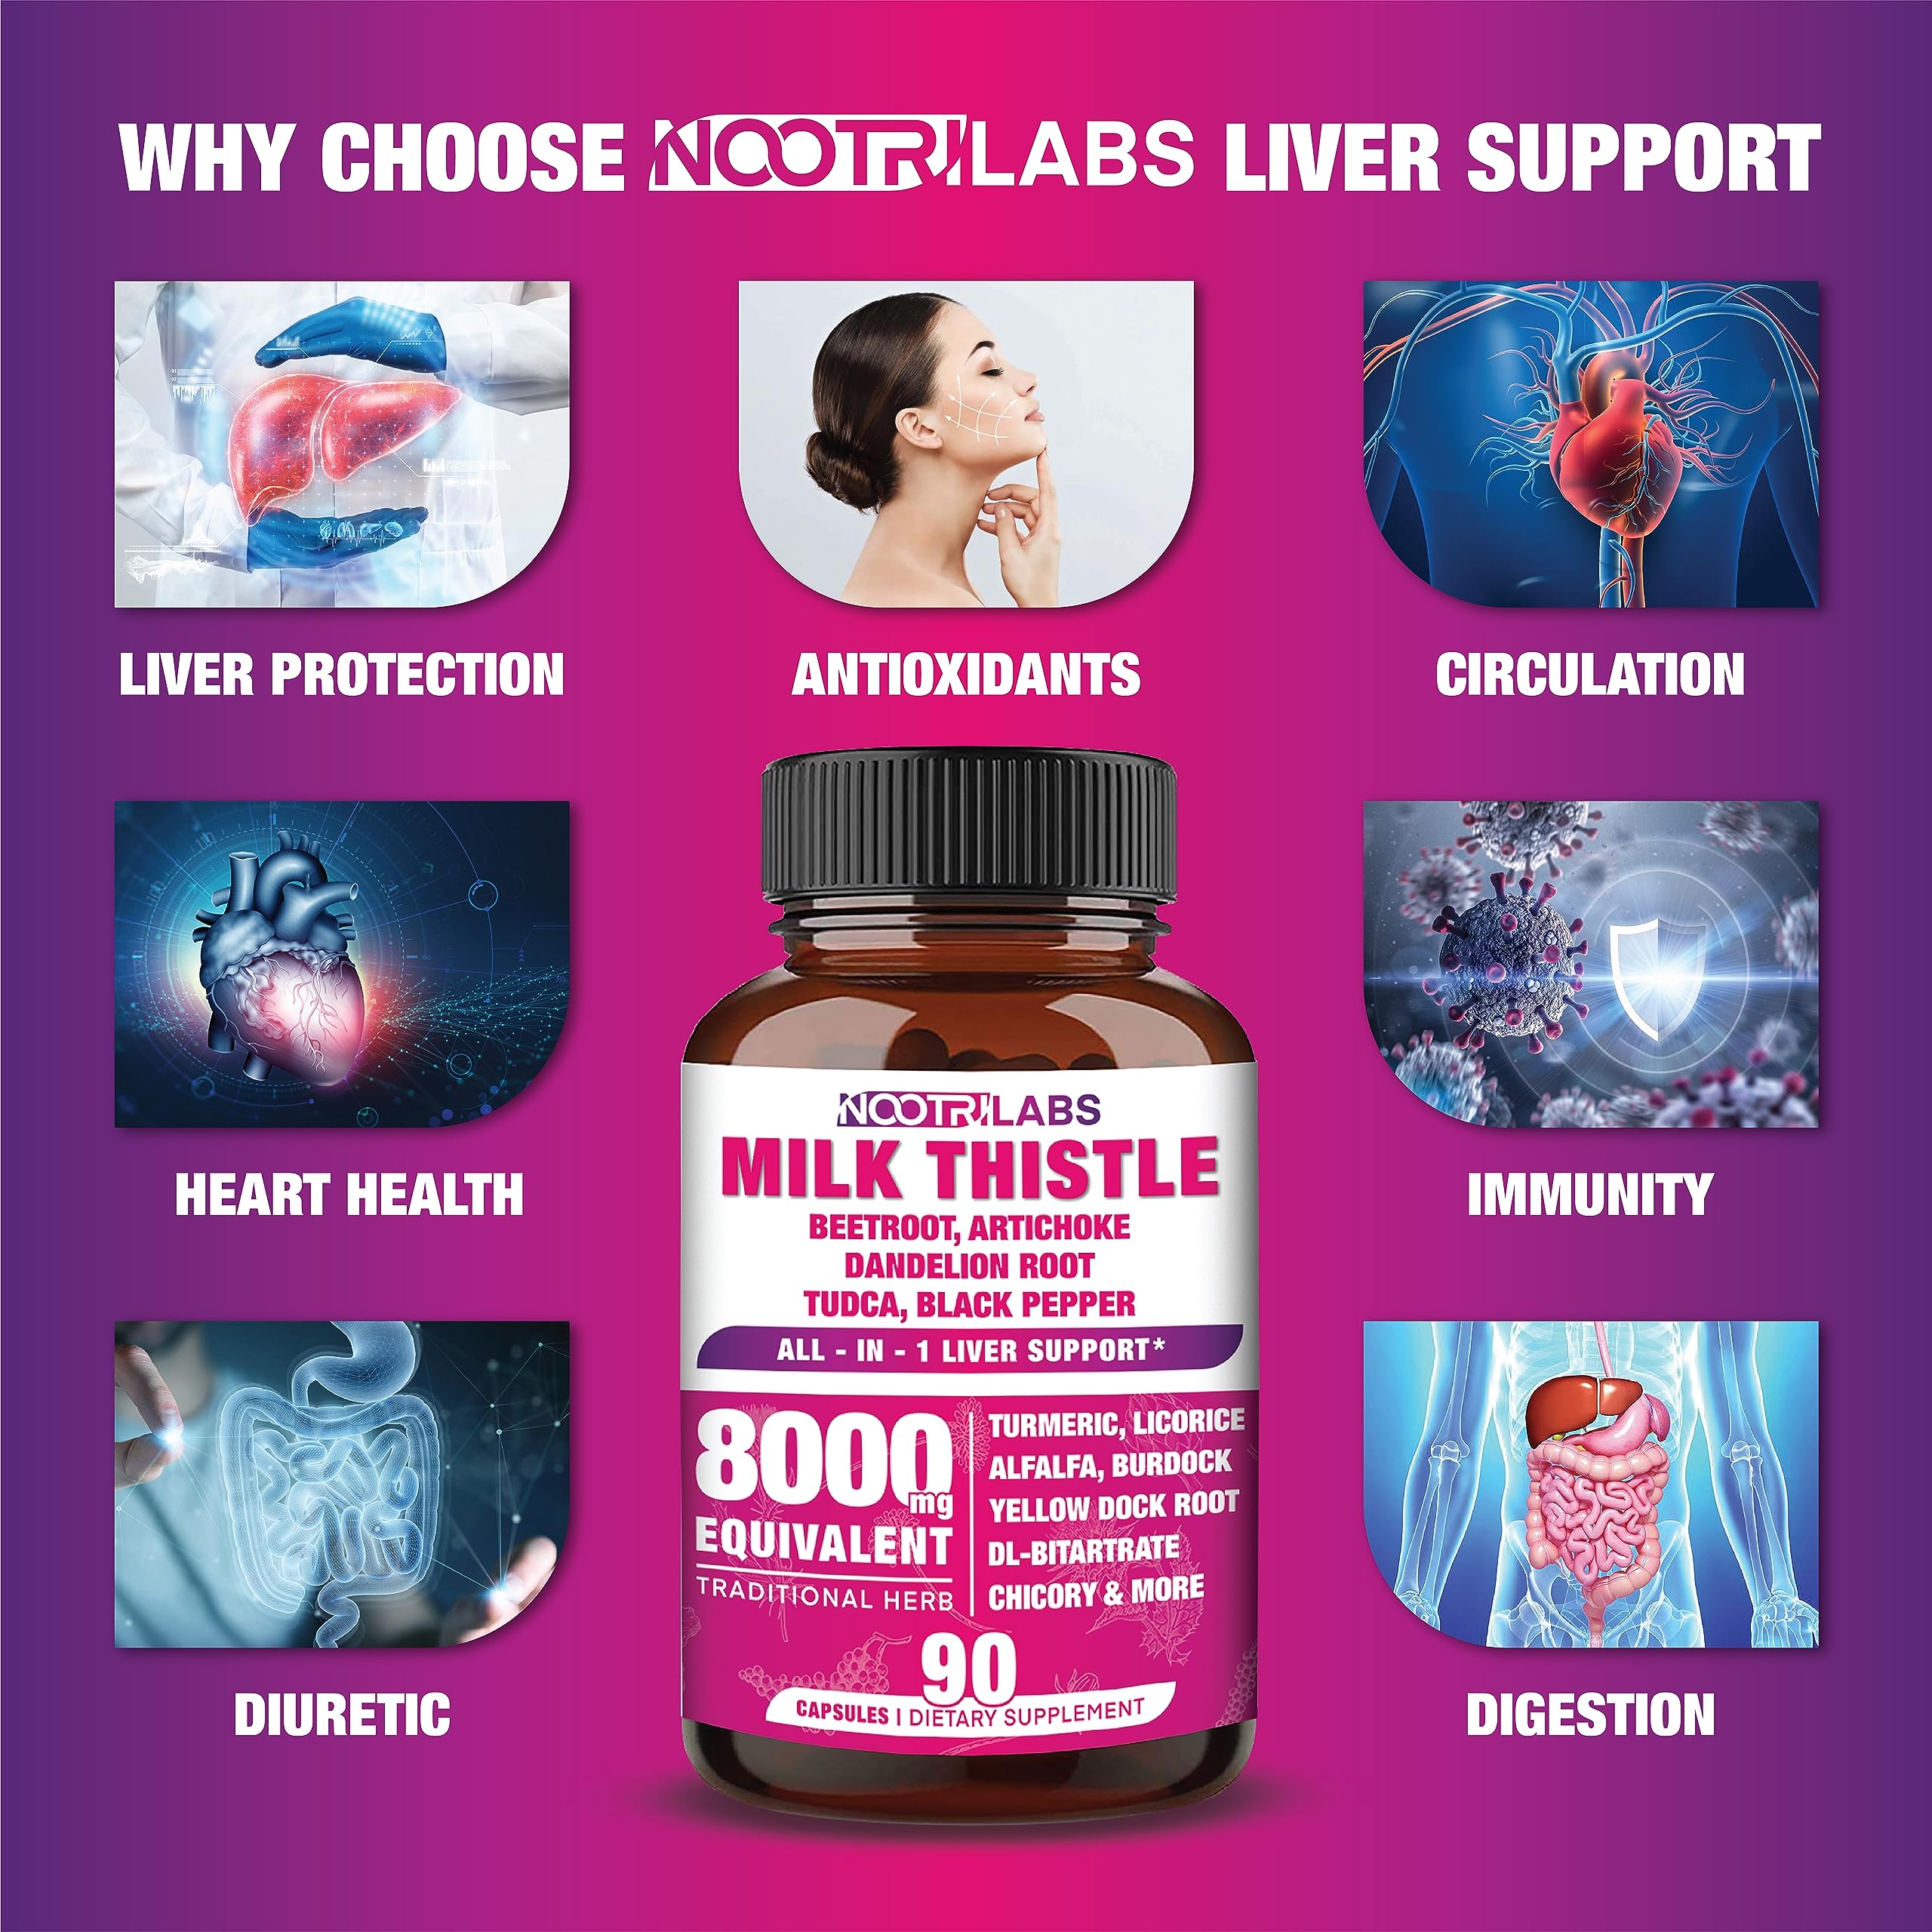 All-in-1 8000mg Milk Thistle Liver Support - 90 Vegan Capsules